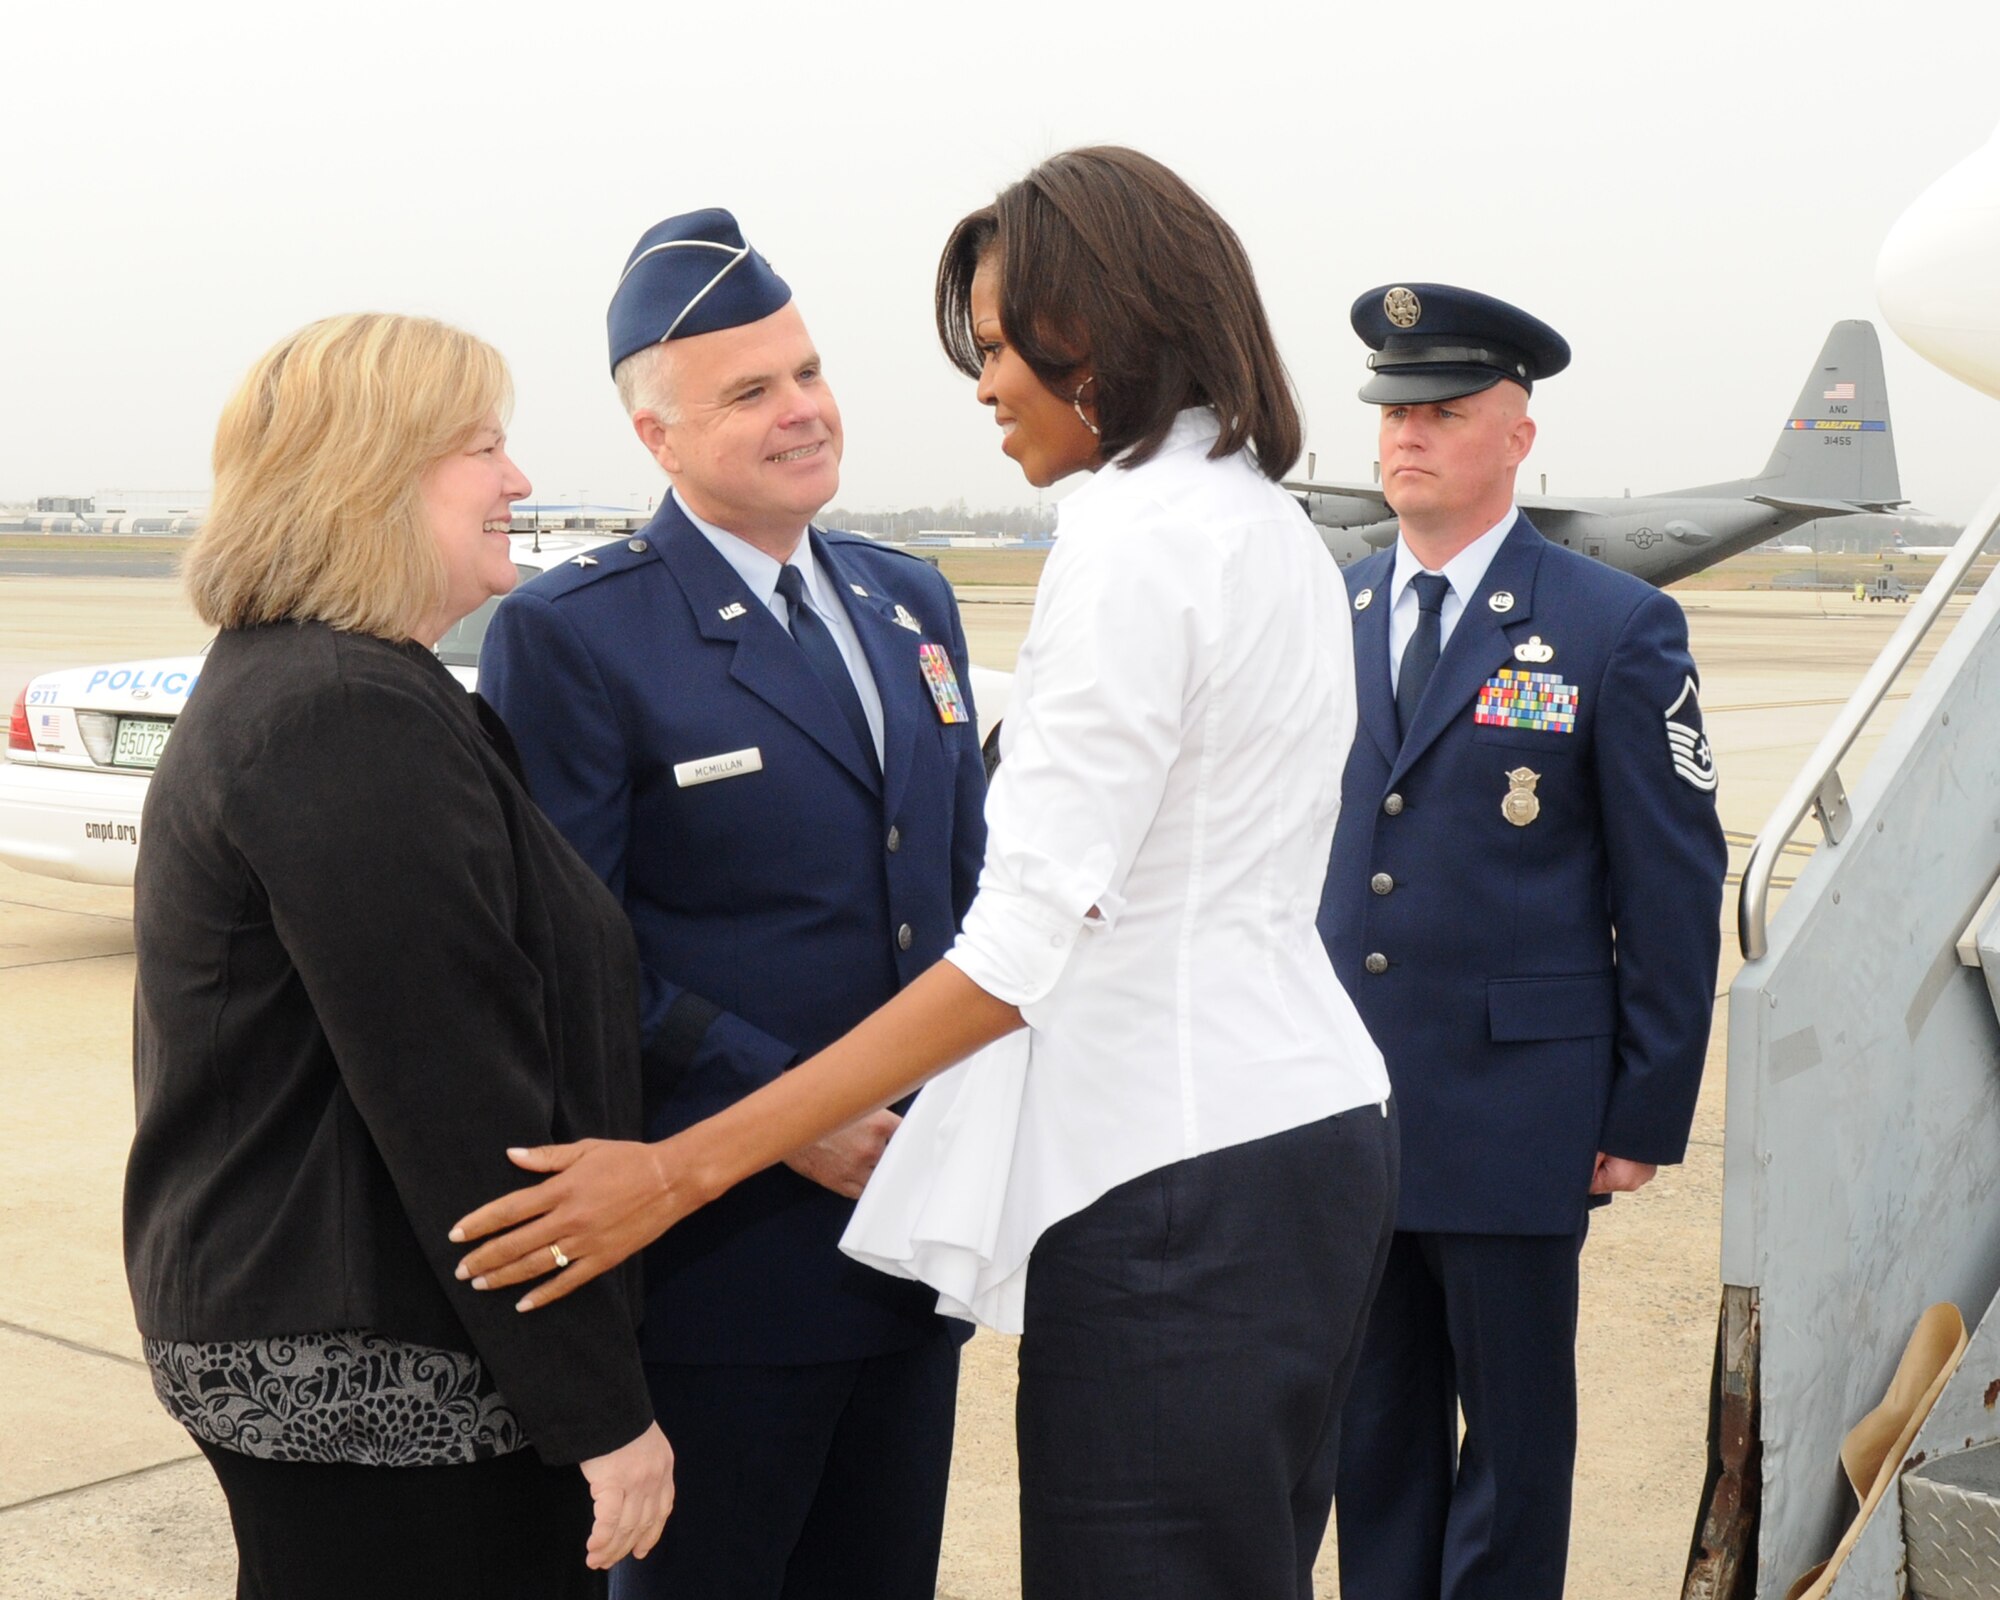 First Lady Michelle Obama is welcomed by Brig. Gen. Tony E. McMillan, 145th Airlift Wing Commander and wife Vickie upon arrival at the  North Carolina Air National Guard Base Charlotte,  N.C.,  March 2, 2012.(Photo by Tech. Sgt. Patricia Findley, 145th AW Public Affairs)